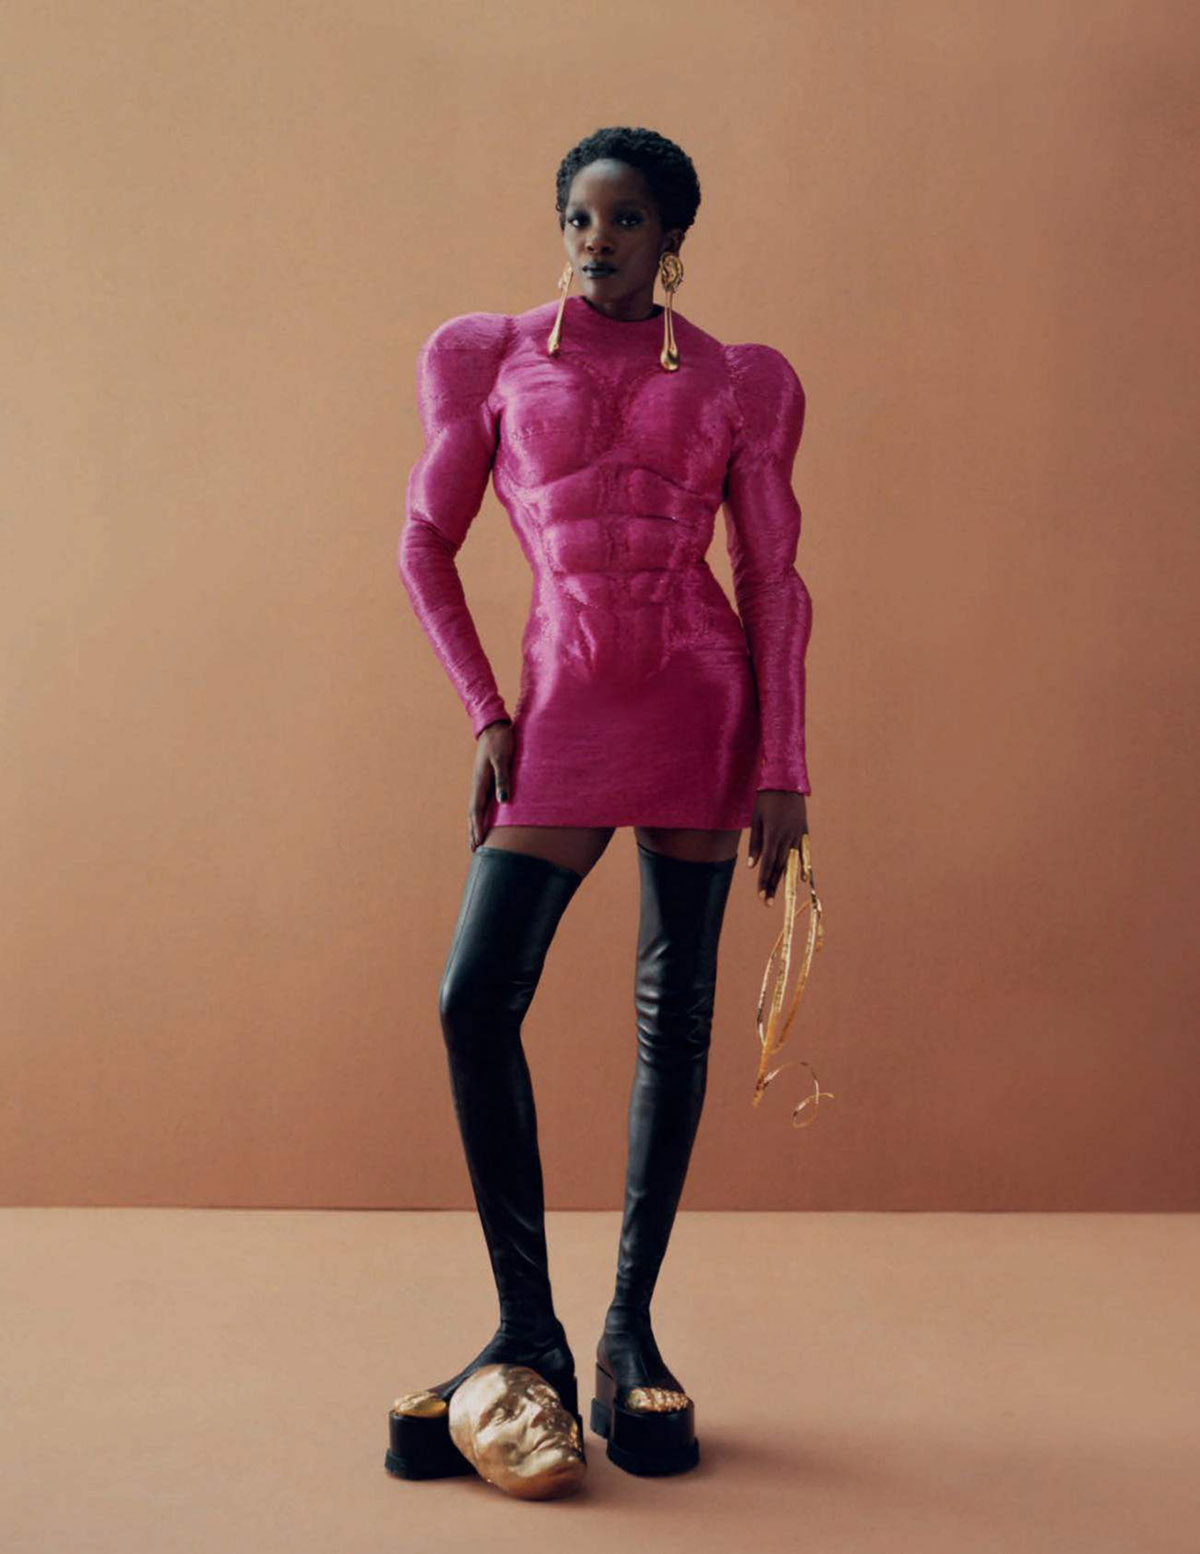 Awuor Dit, Tricia Akello and Liyah James by Camila Falquez for Vogue Spain July 2021